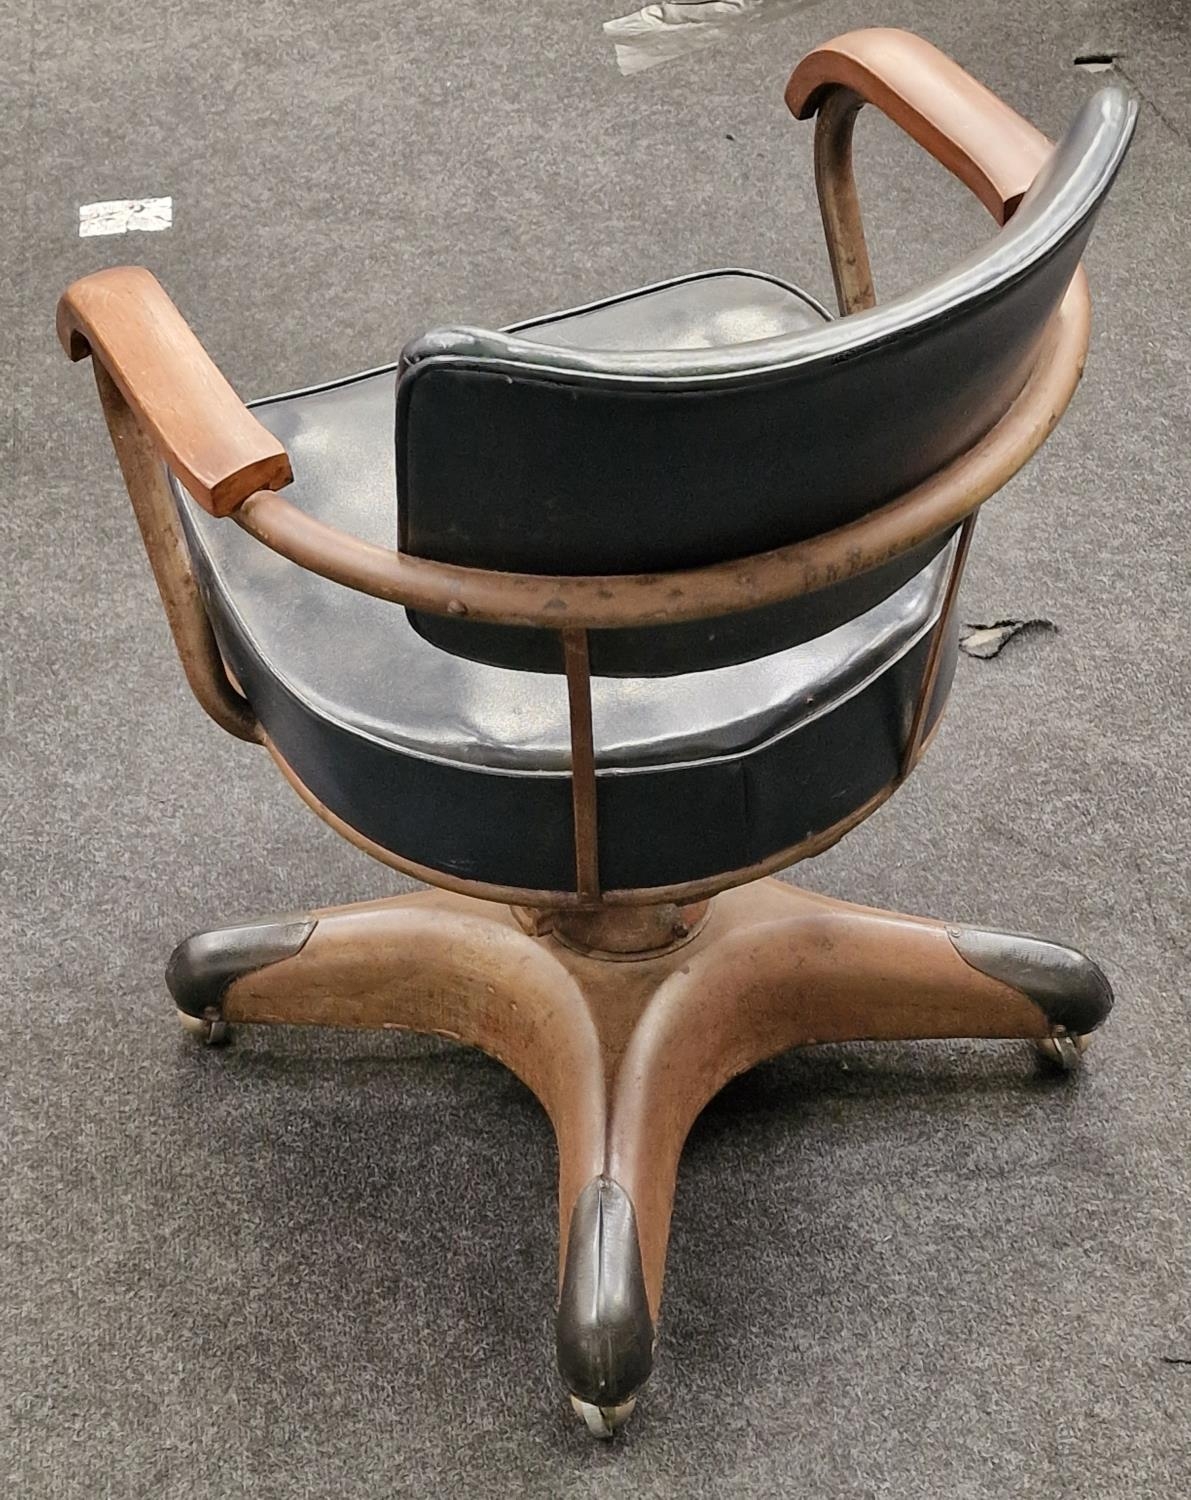 Revolving mid century office chair with cast metal base and casters, set on wooden arm rests - Image 2 of 3